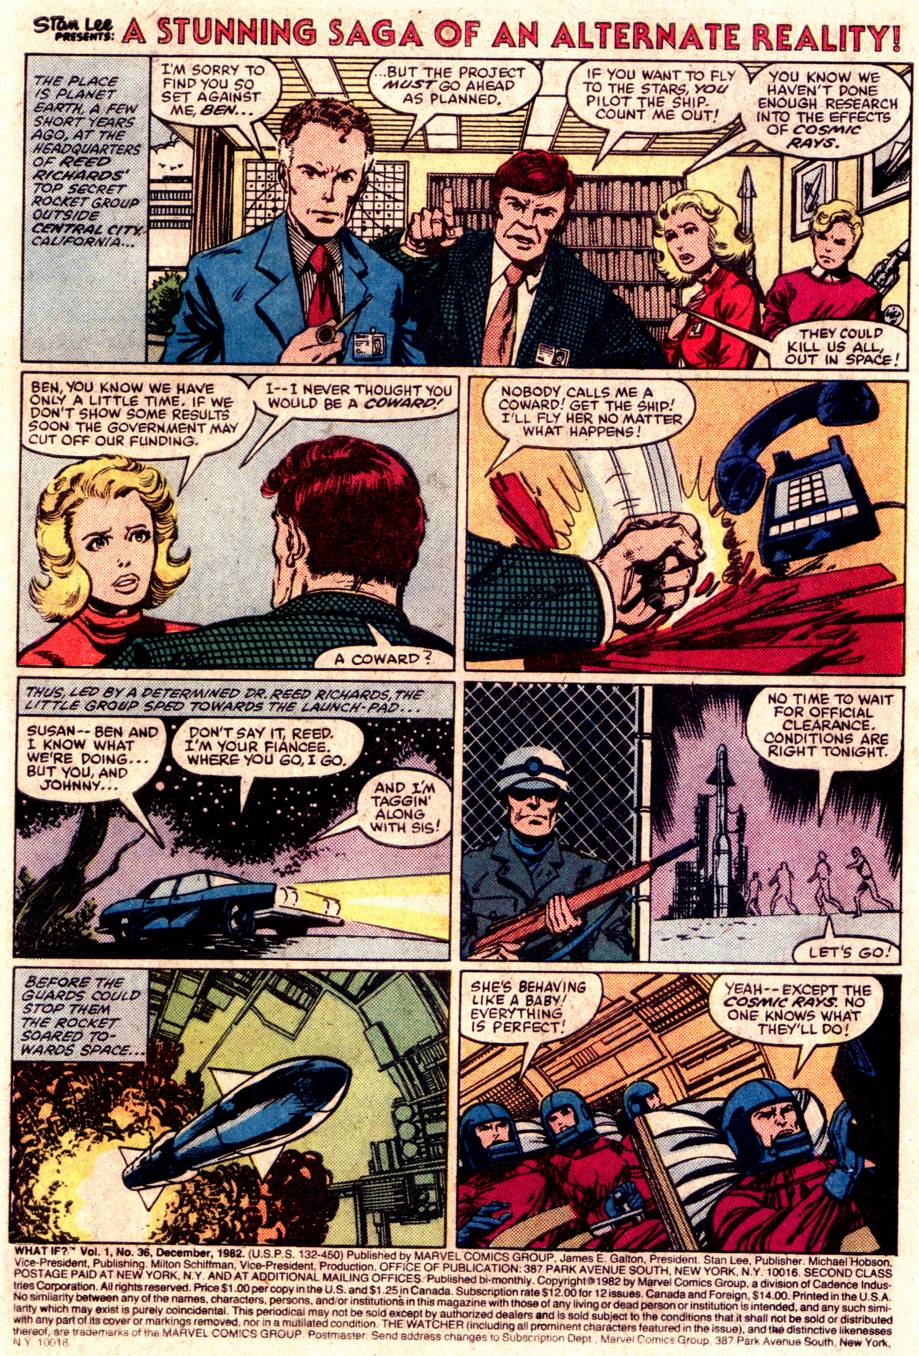 What If? (1977) issue 36 - The Fantastic Four Had Not Gained Their Powers - Page 2